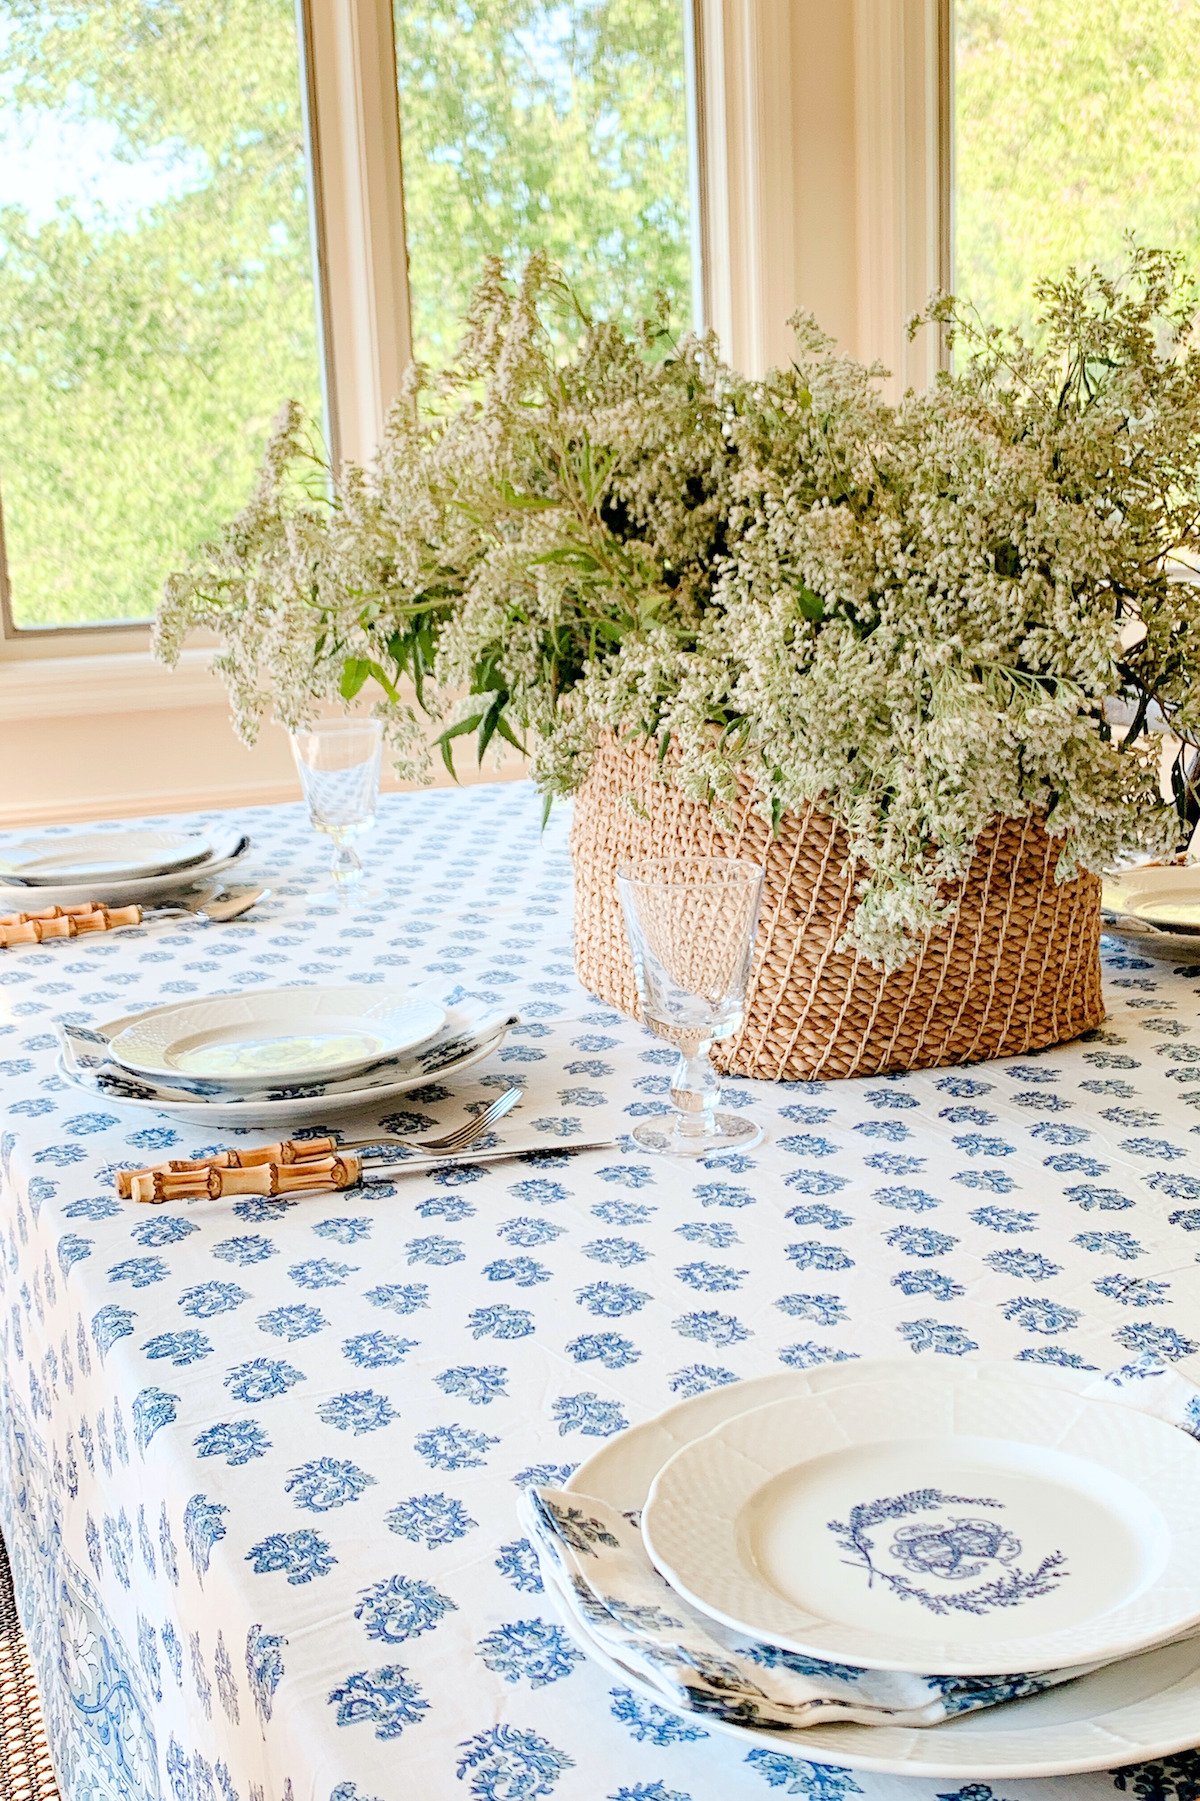 A blue and white block print tablecloth on a table surrounded by wood chairs.